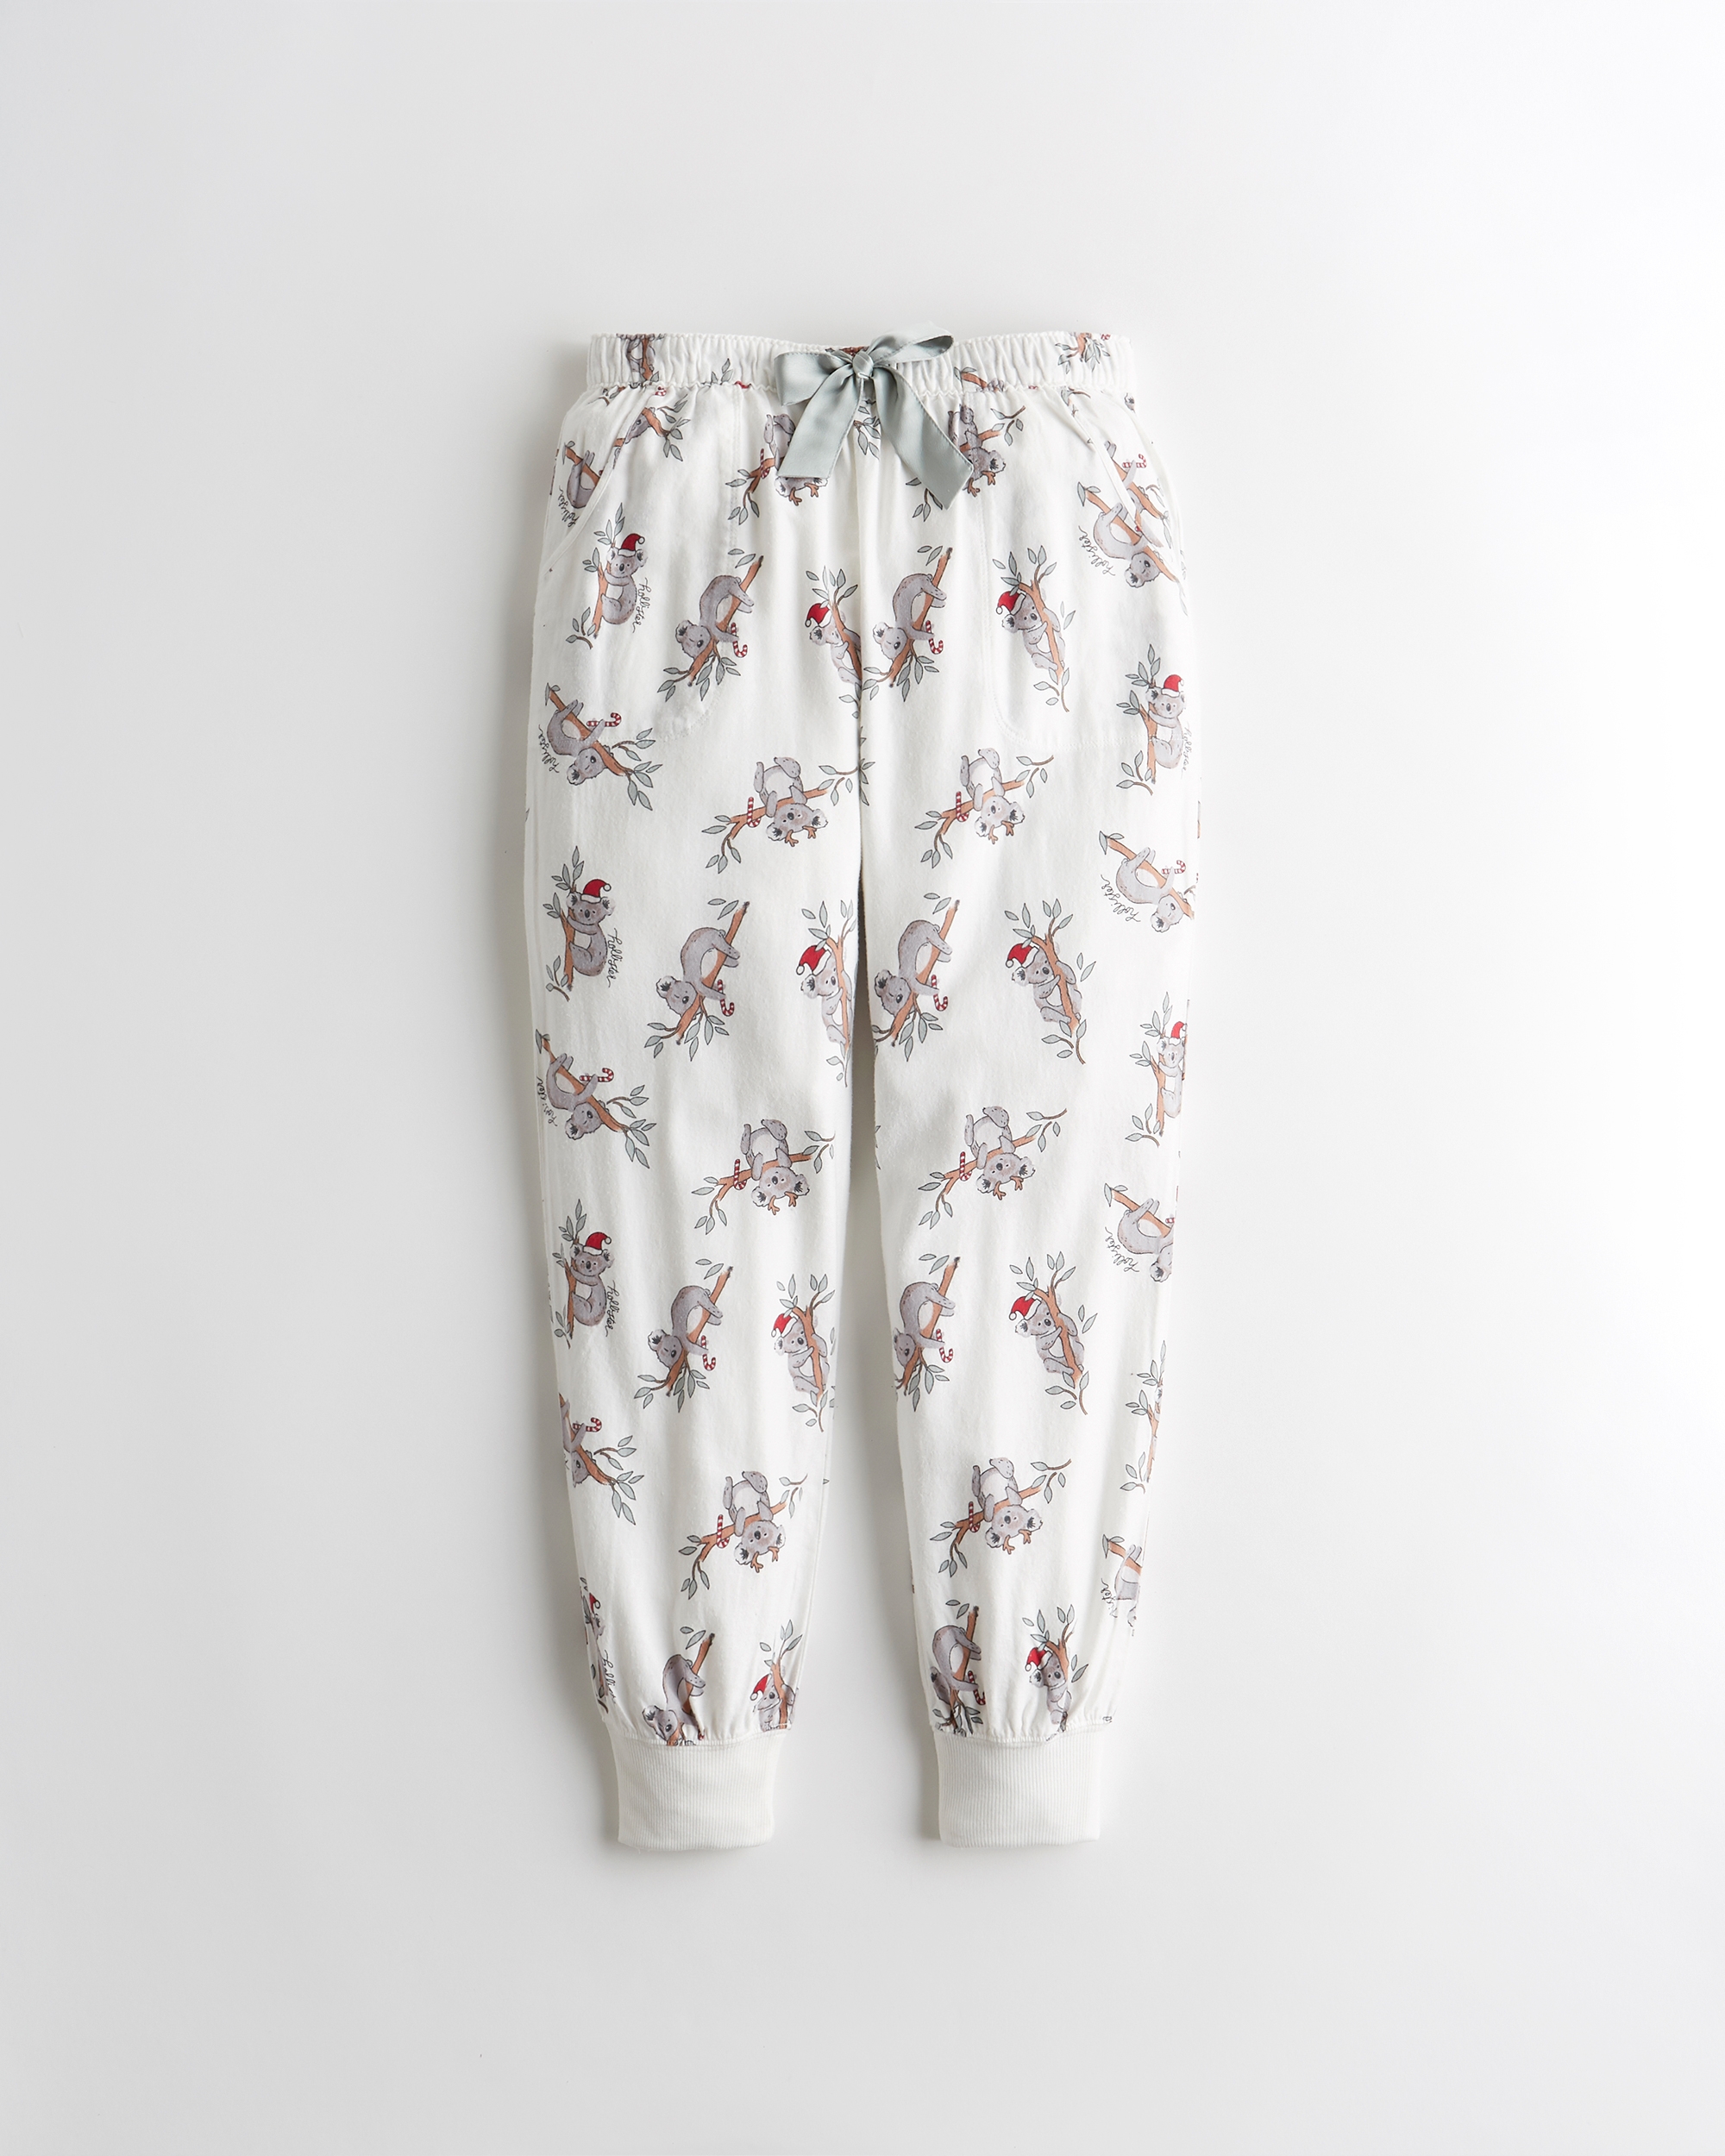 hollister flannel joggers